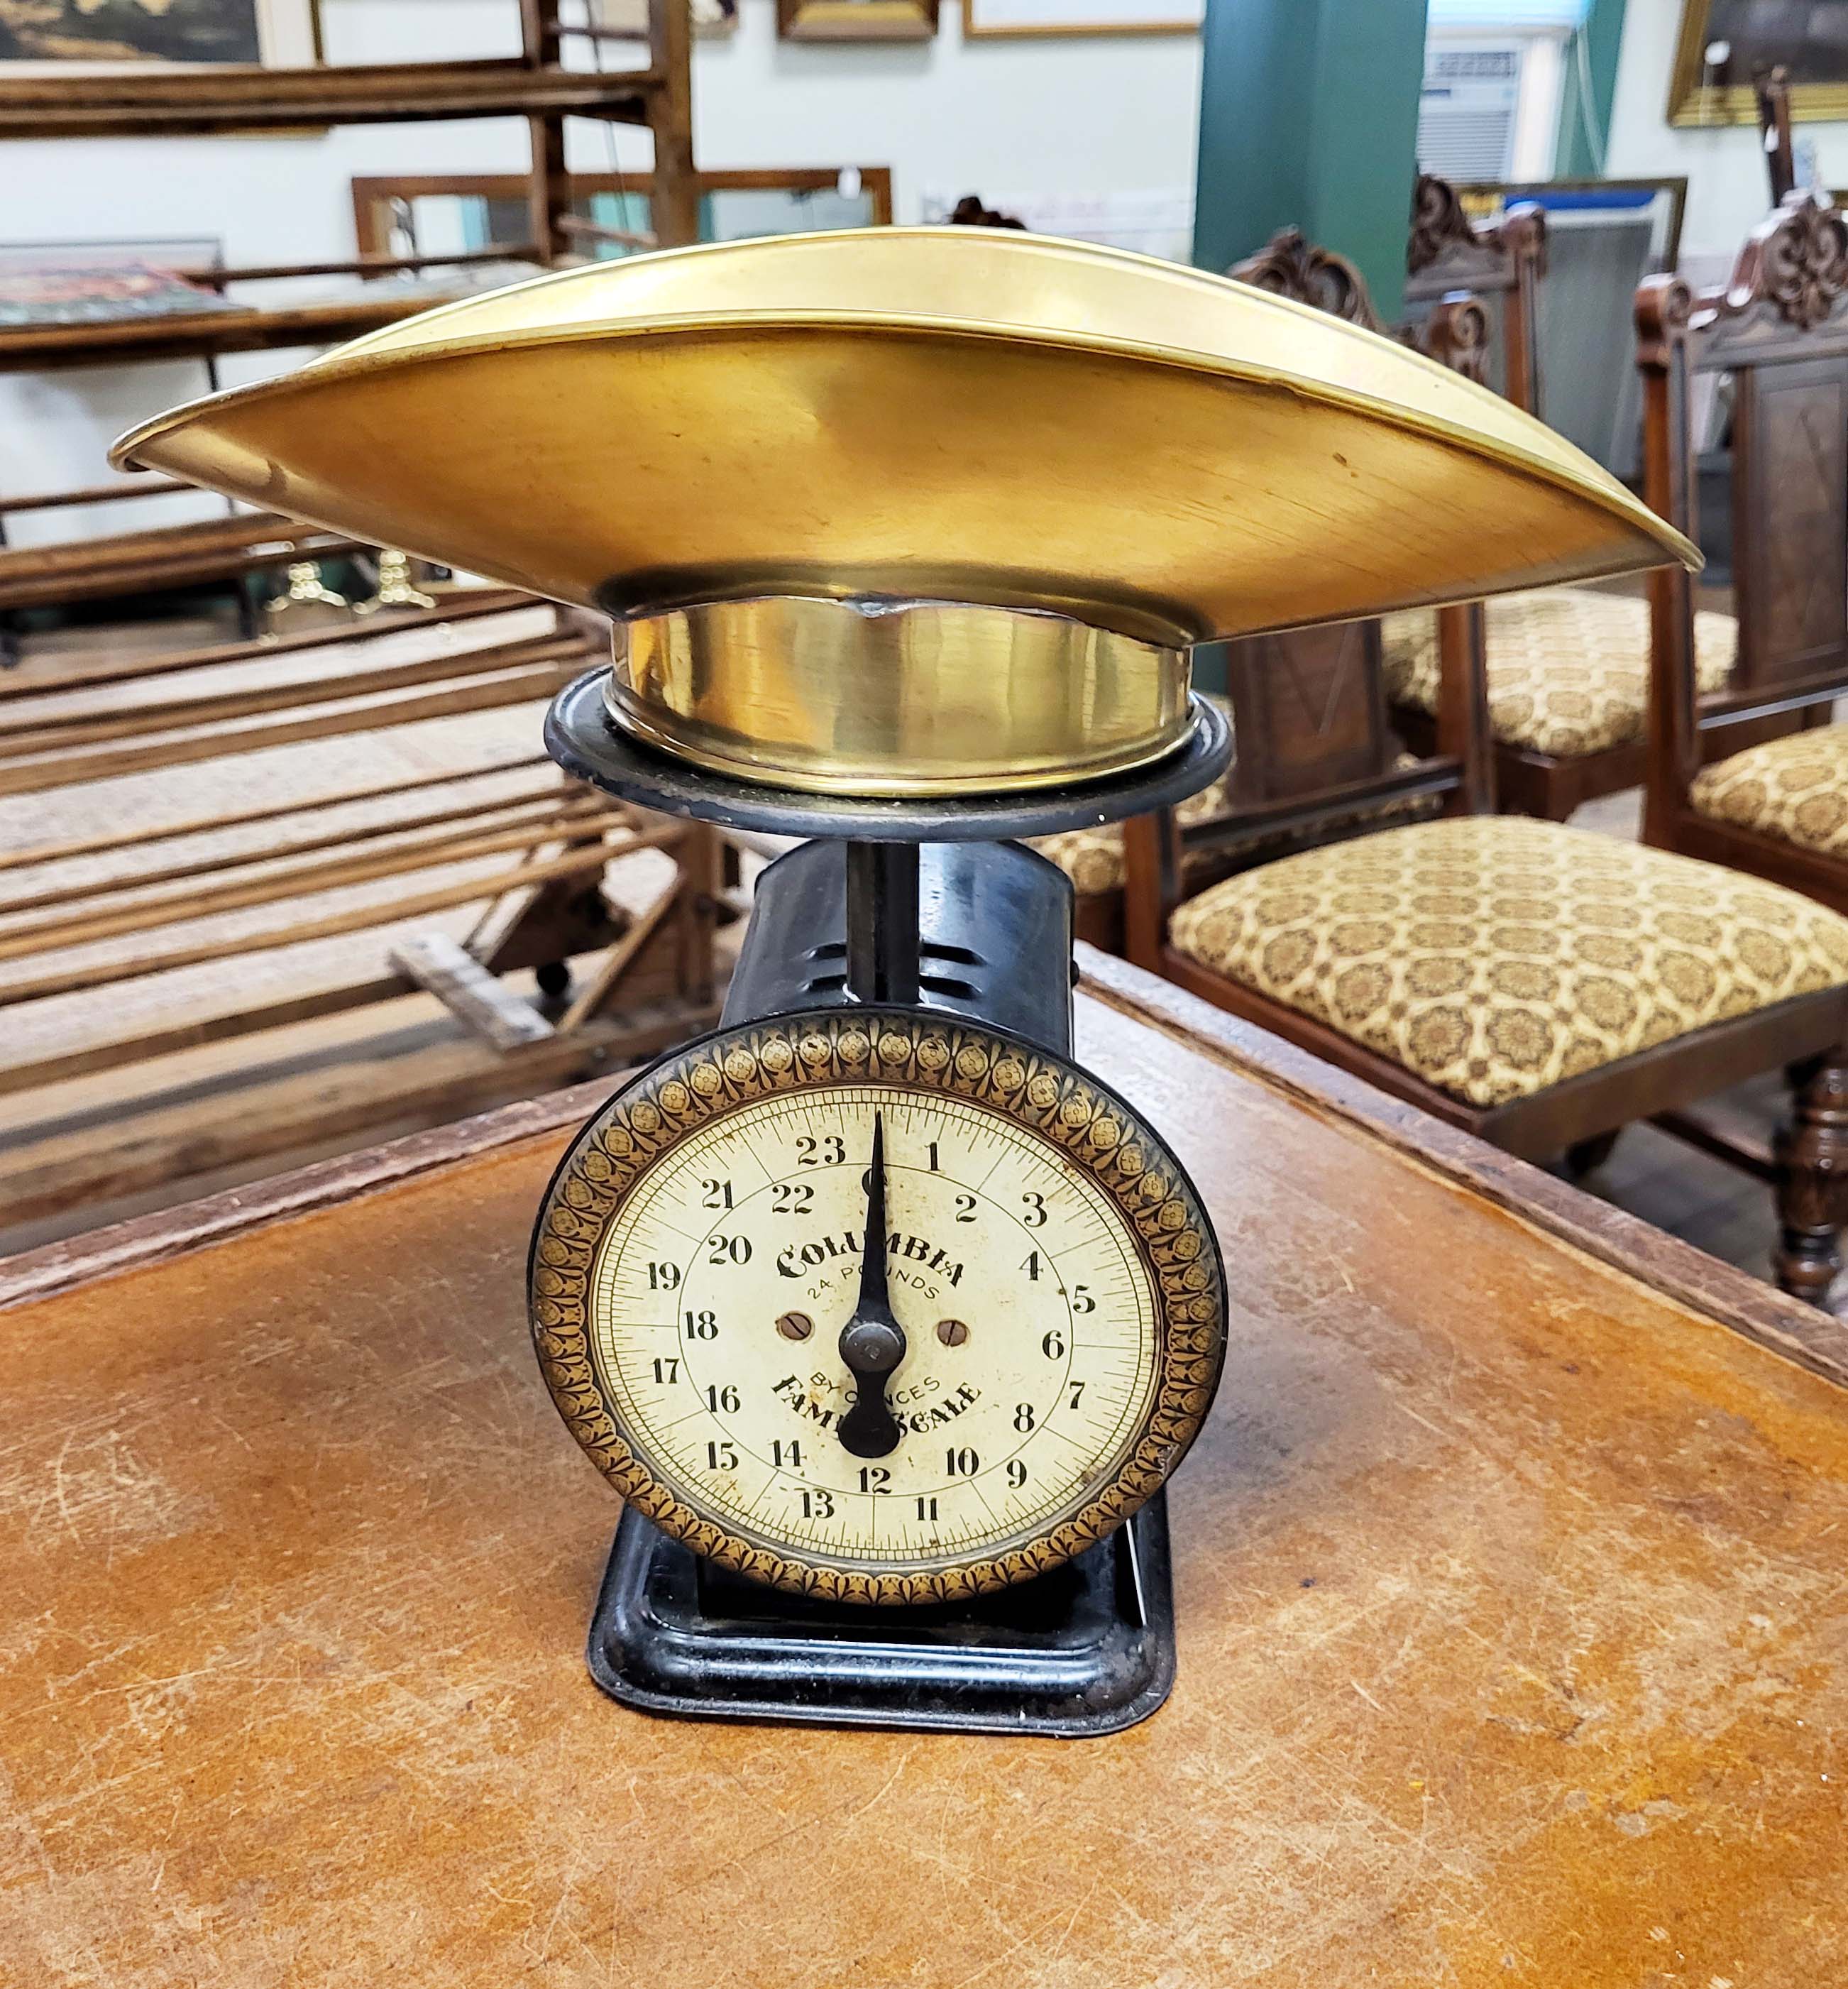 Vintage 1900s Salter's Family Scale No. 50